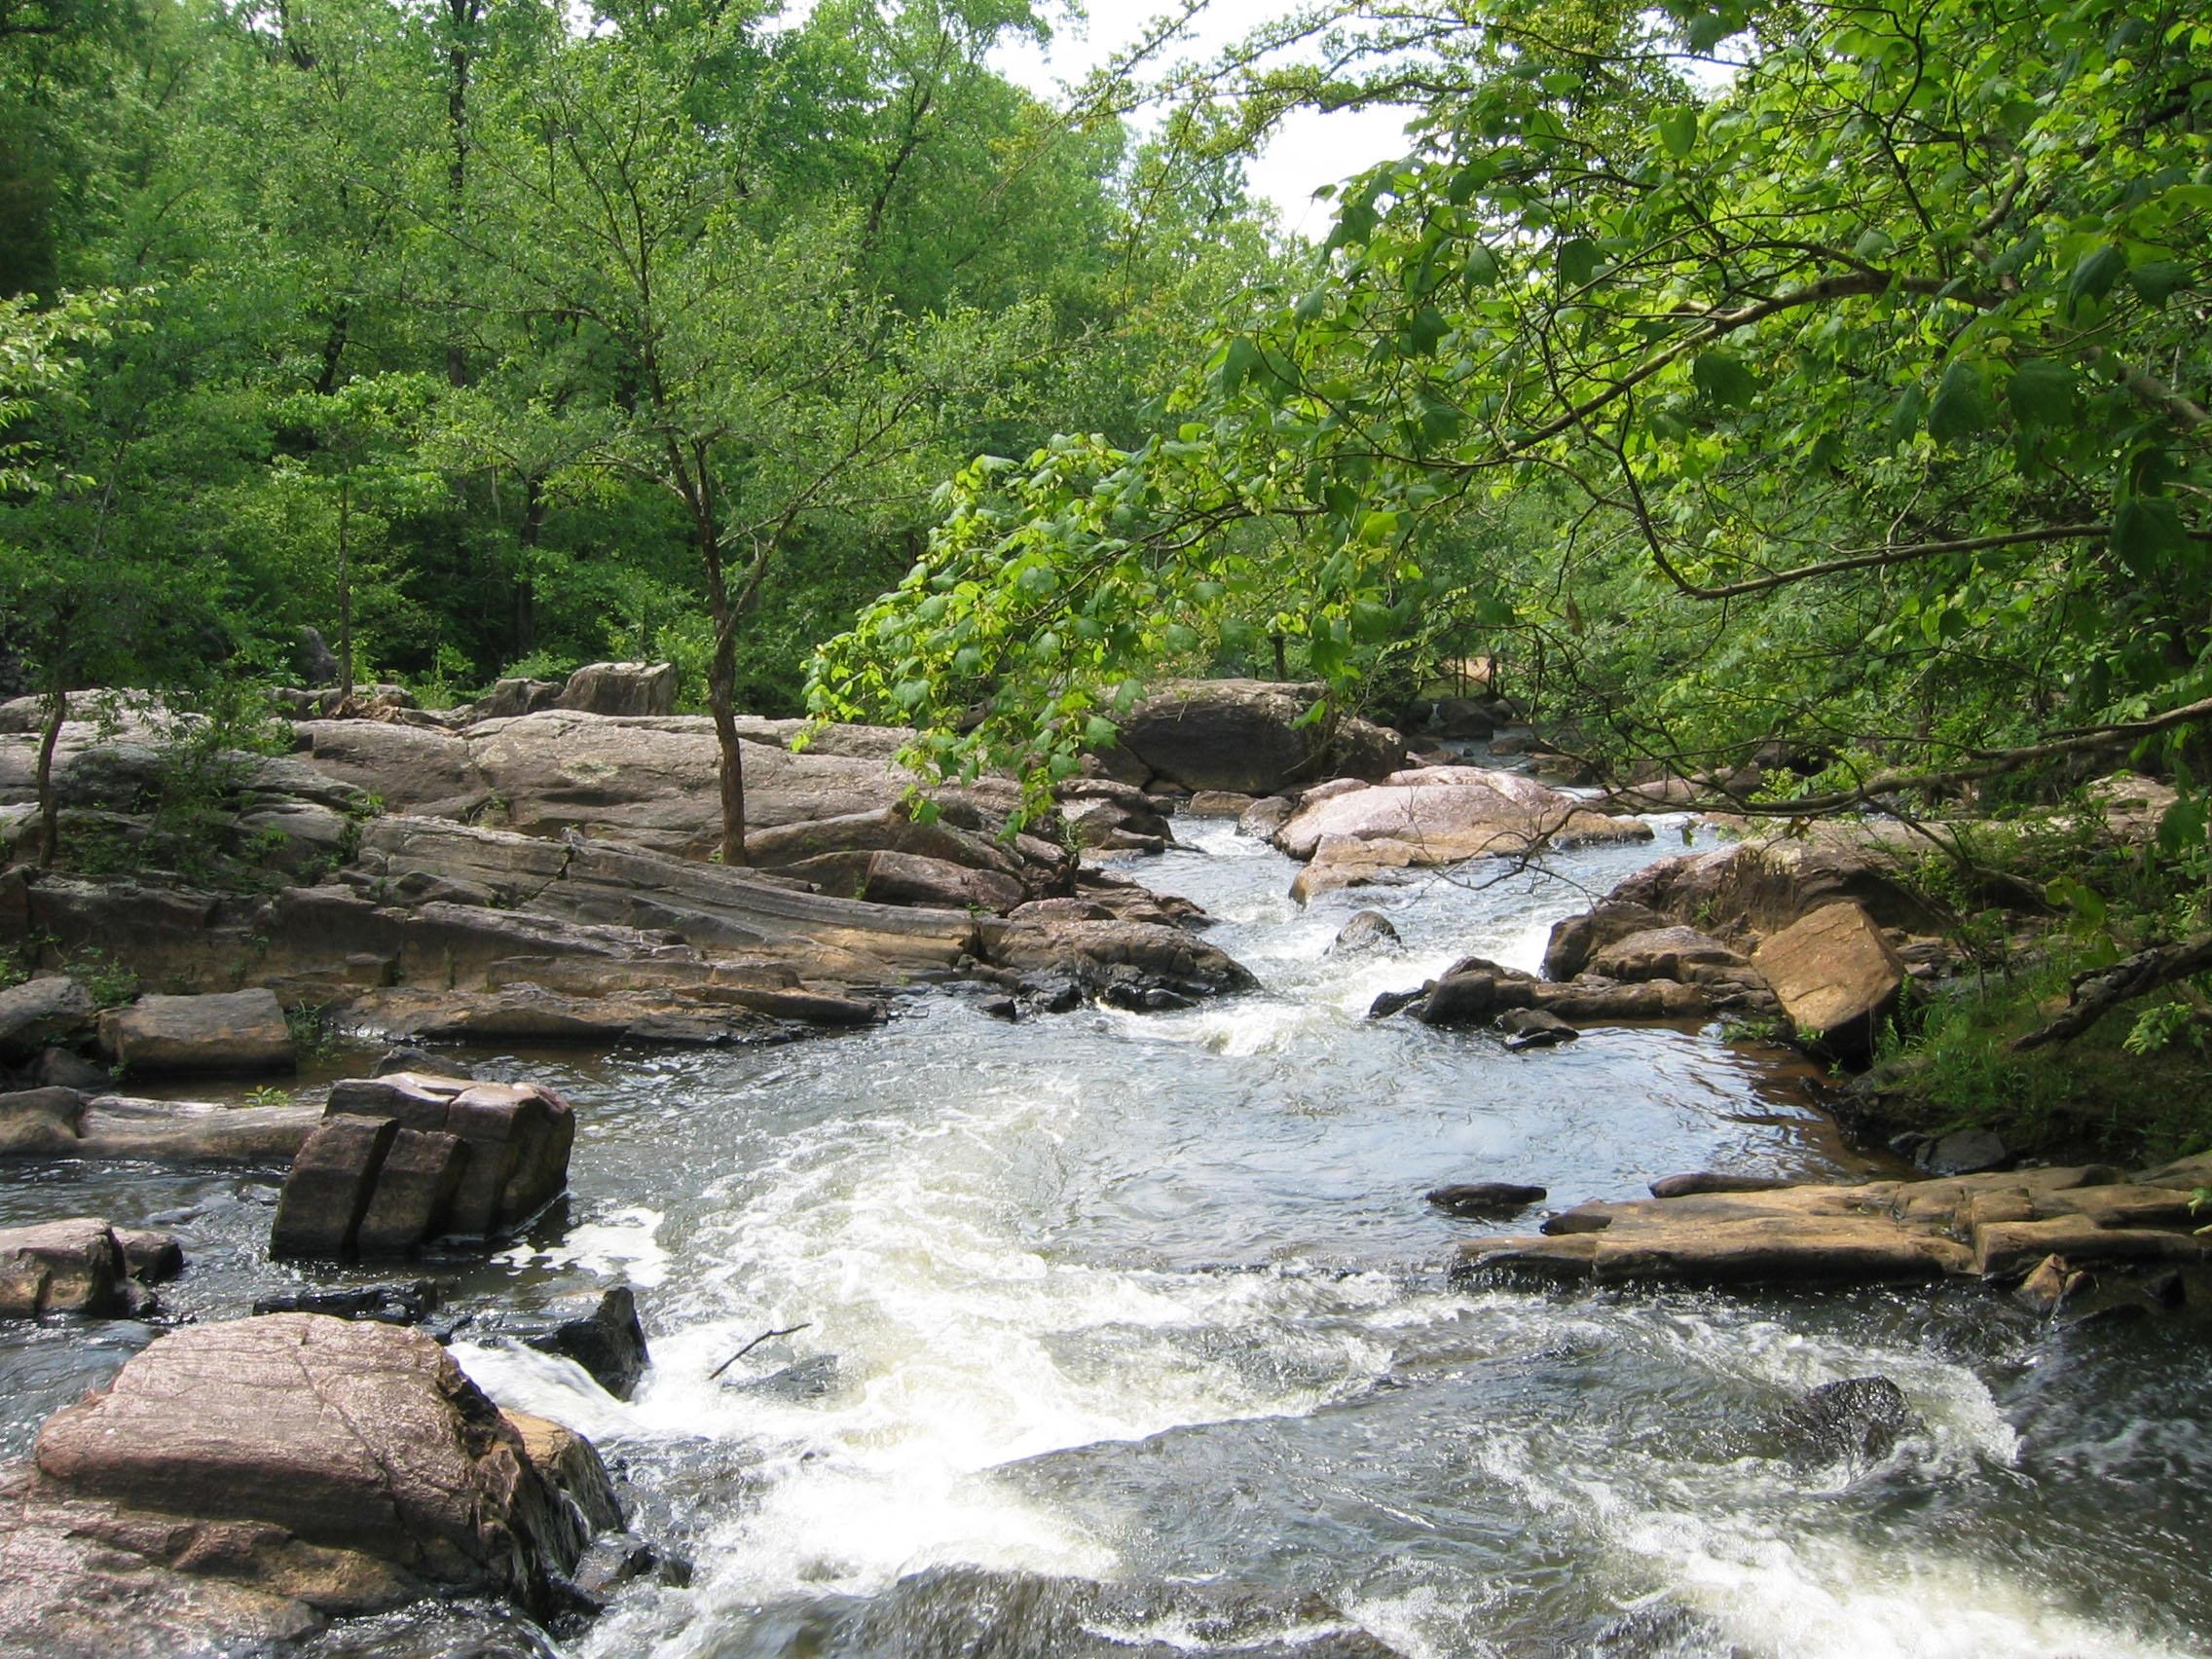 Chewacla State Park Flowing Creek with Rocks